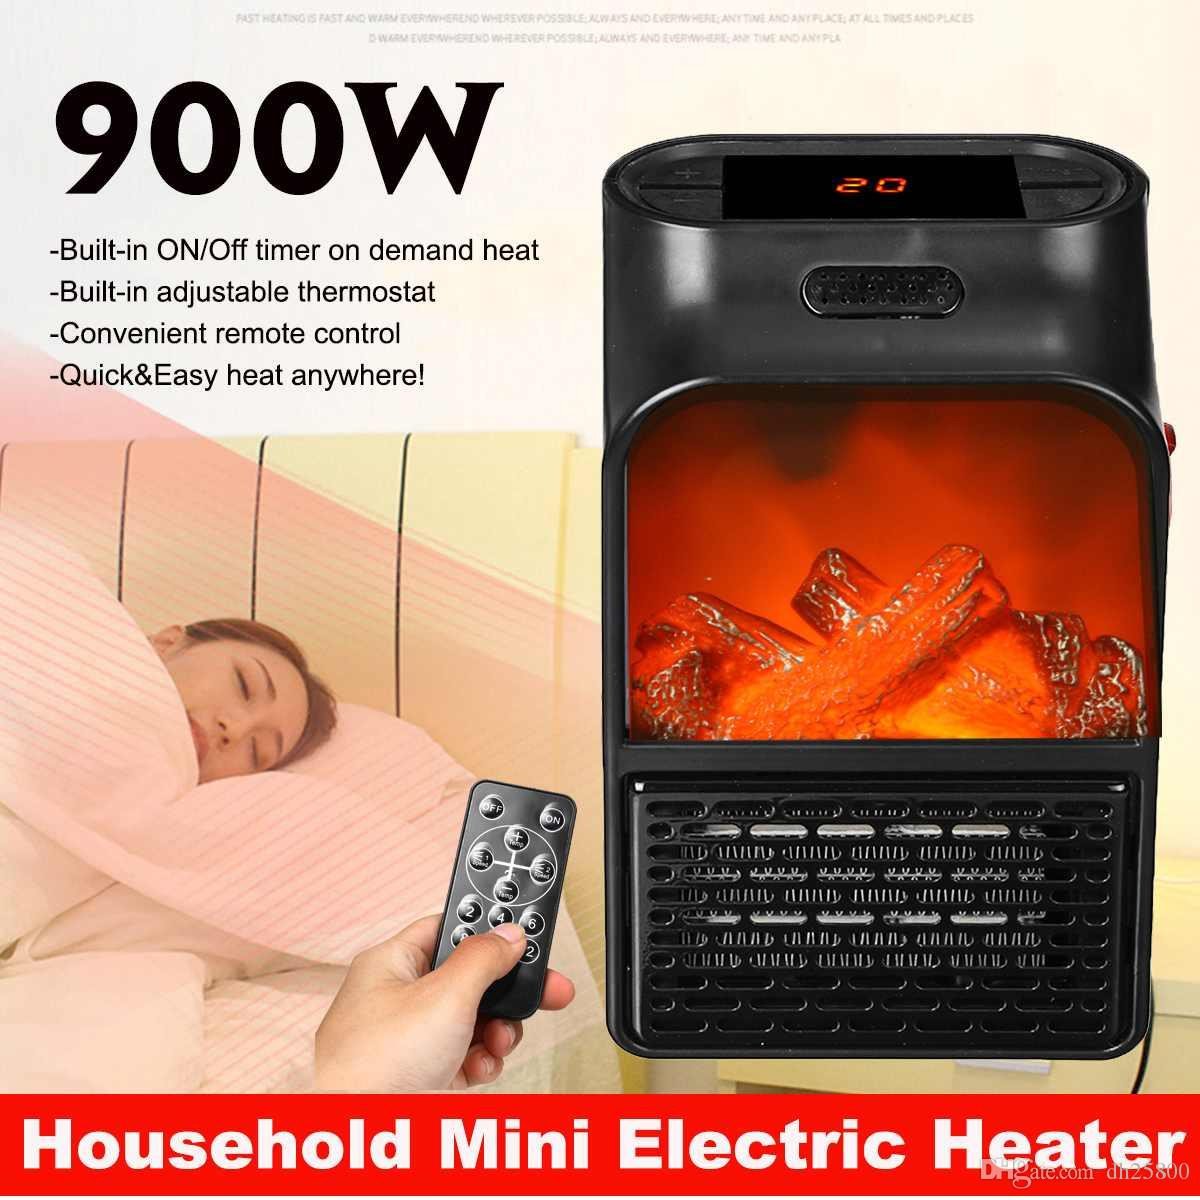 Small Heaters for Bedroom Best Of 2019 900w Mini Electric Heater Portable Electric Space Room Heater Air Heating Space Winter Warmer Machine with Remote Control From Dh $25 13